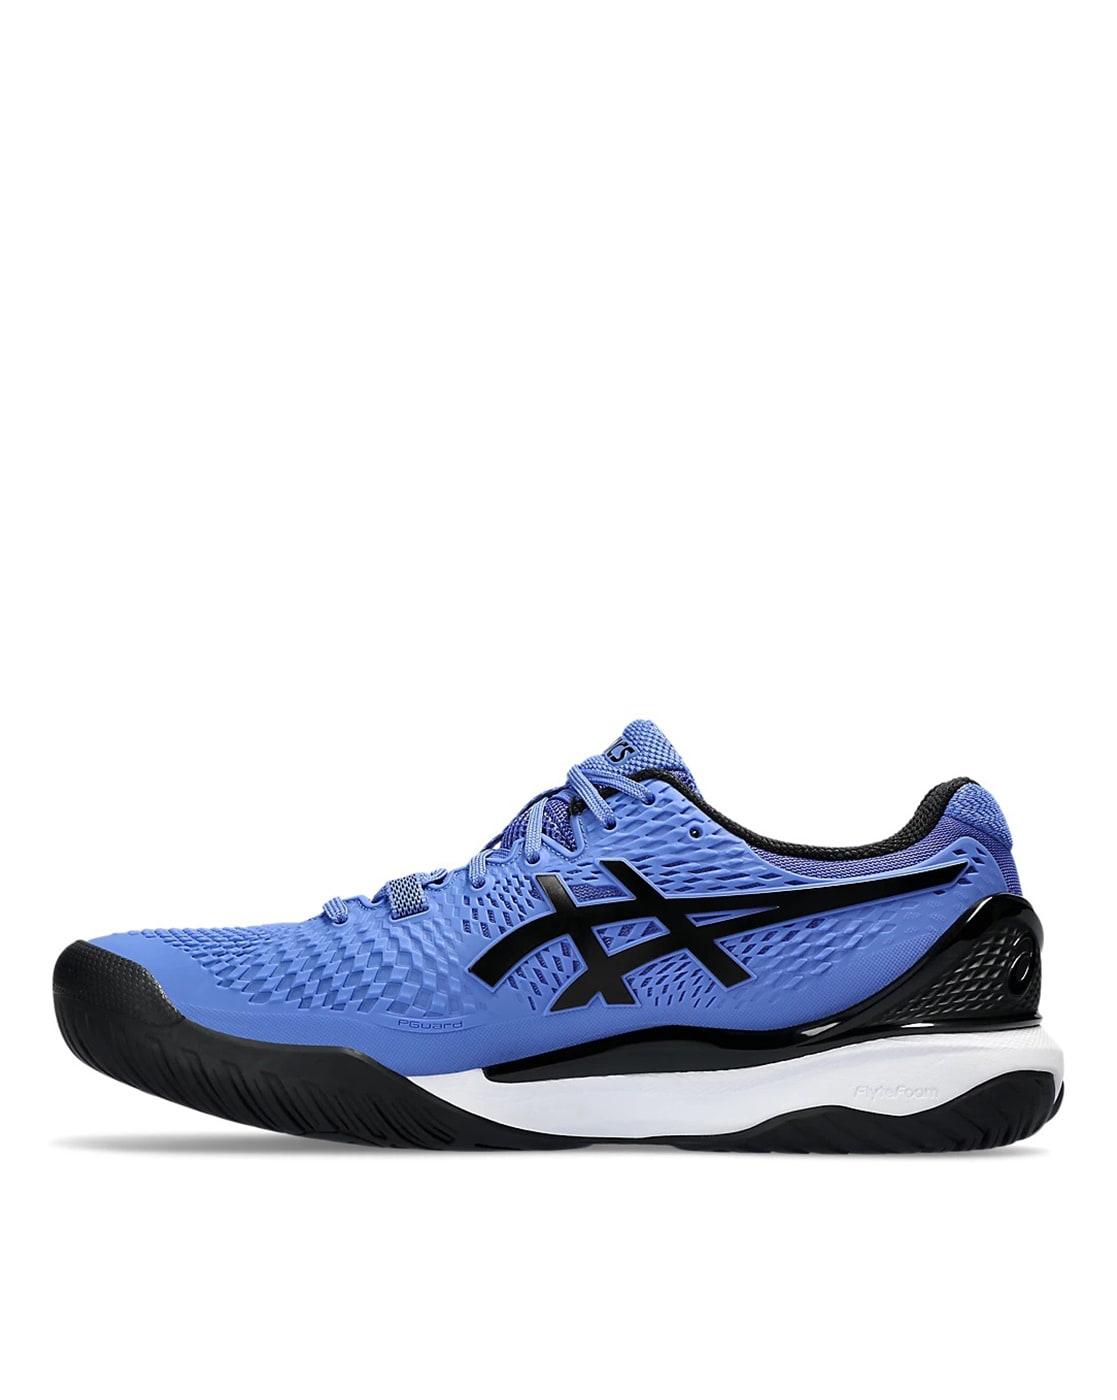 Blue Sneakers of Asics Brand. Stylish Lace-up Shoes for Warm Weather and a  Fitness Hall Editorial Stock Photo - Image of footwear, activity: 185668838